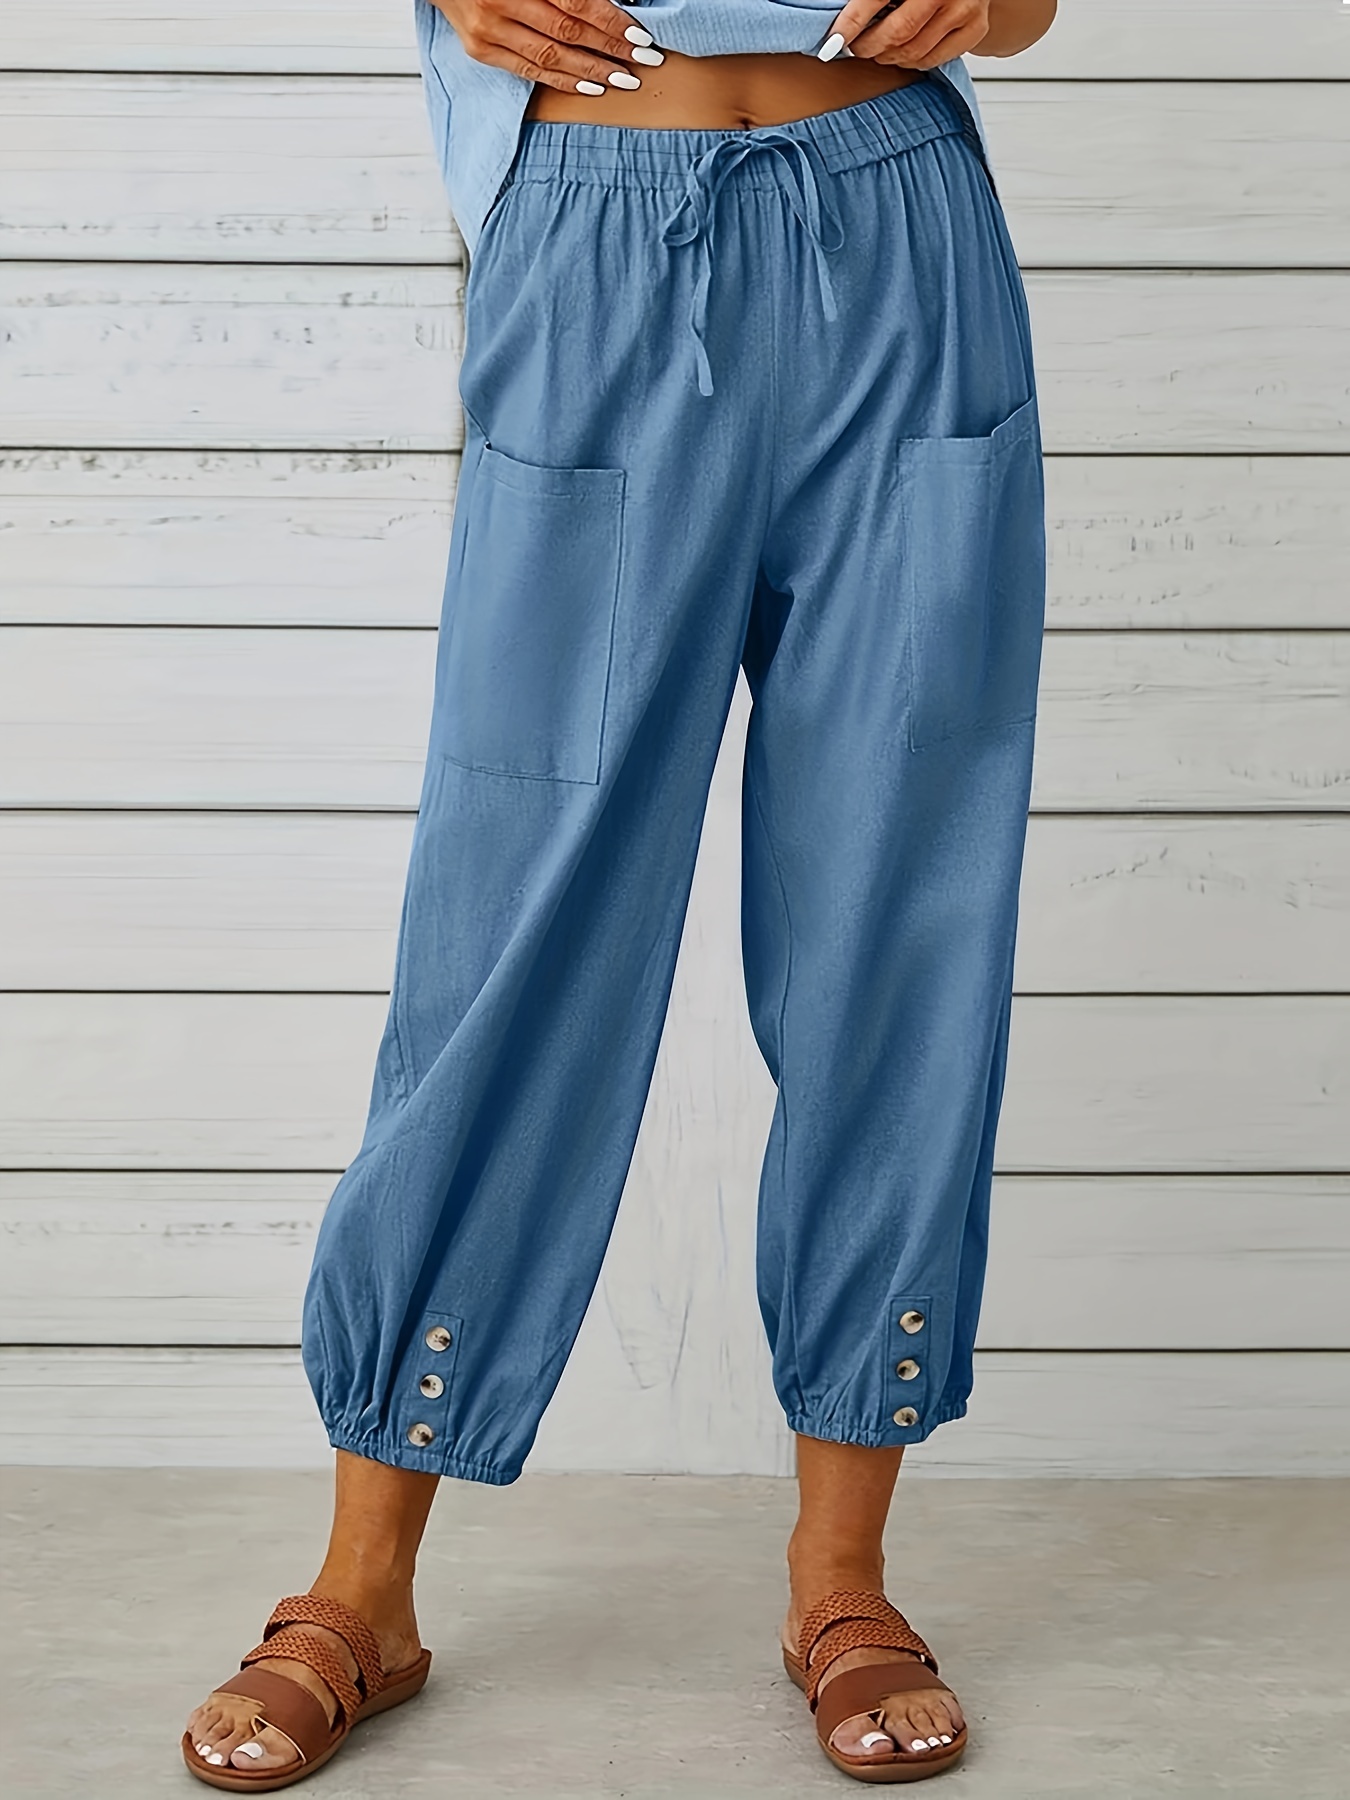  Wide Leg Cropped Pants For Women Womens Capris For